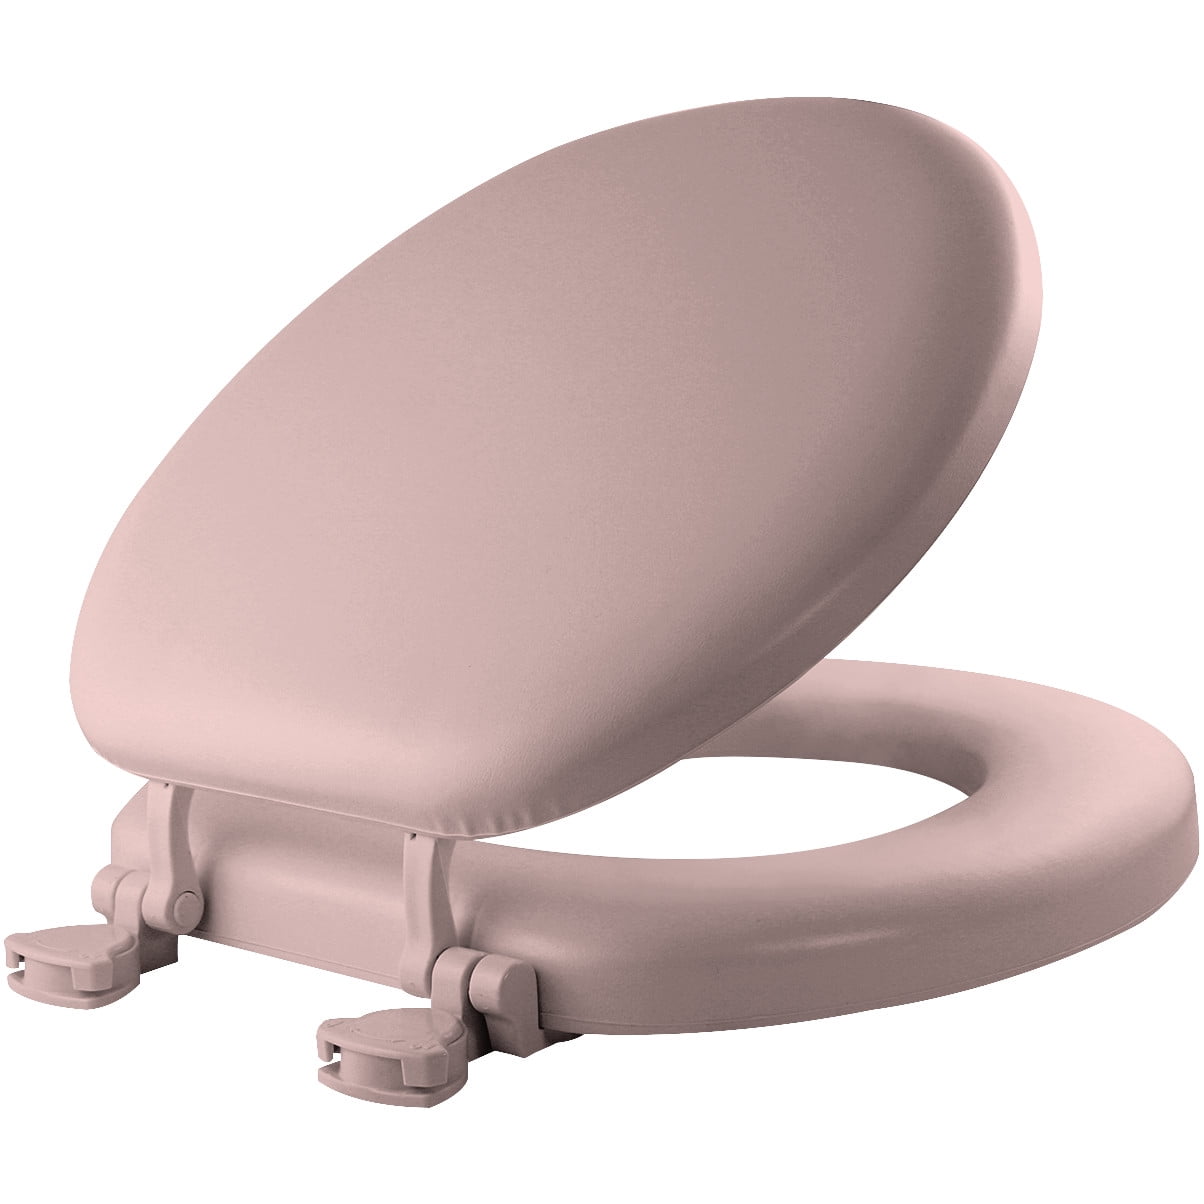 Pink ROUND MAYFAIR Soft Toilet Seat Easily Remove 13EC 023 Padded with Wood Core